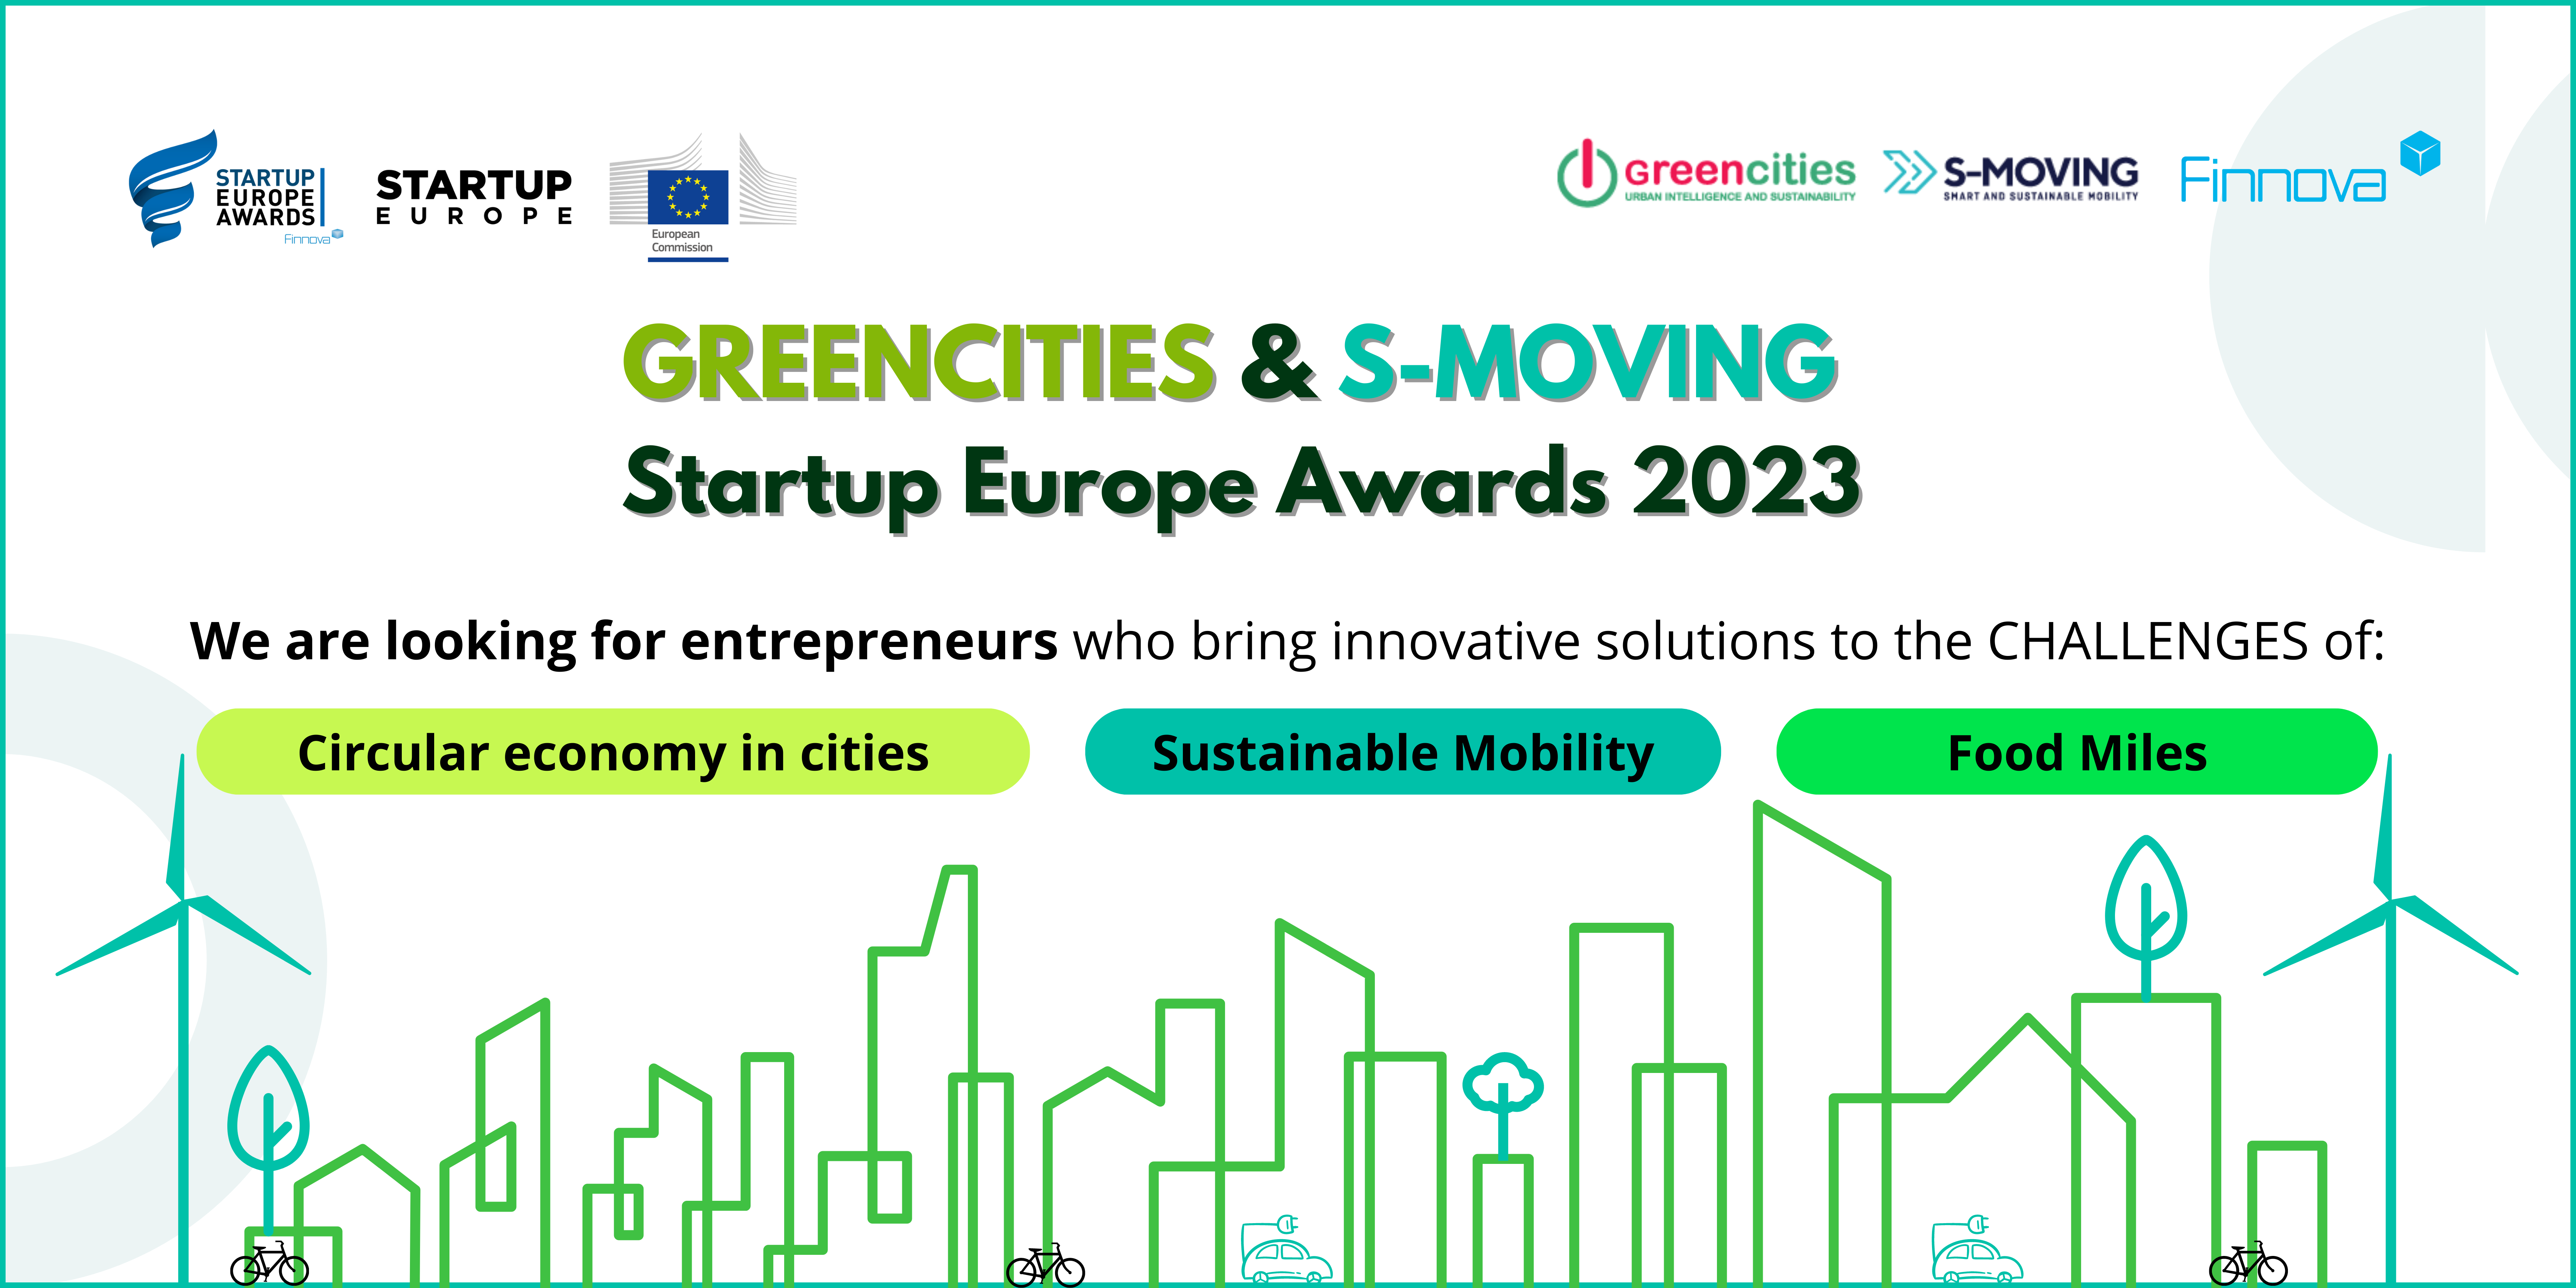 Green innovation in action! Participate in the Greencities & S-Moving Startup Europe Awards and transform the future of cities!